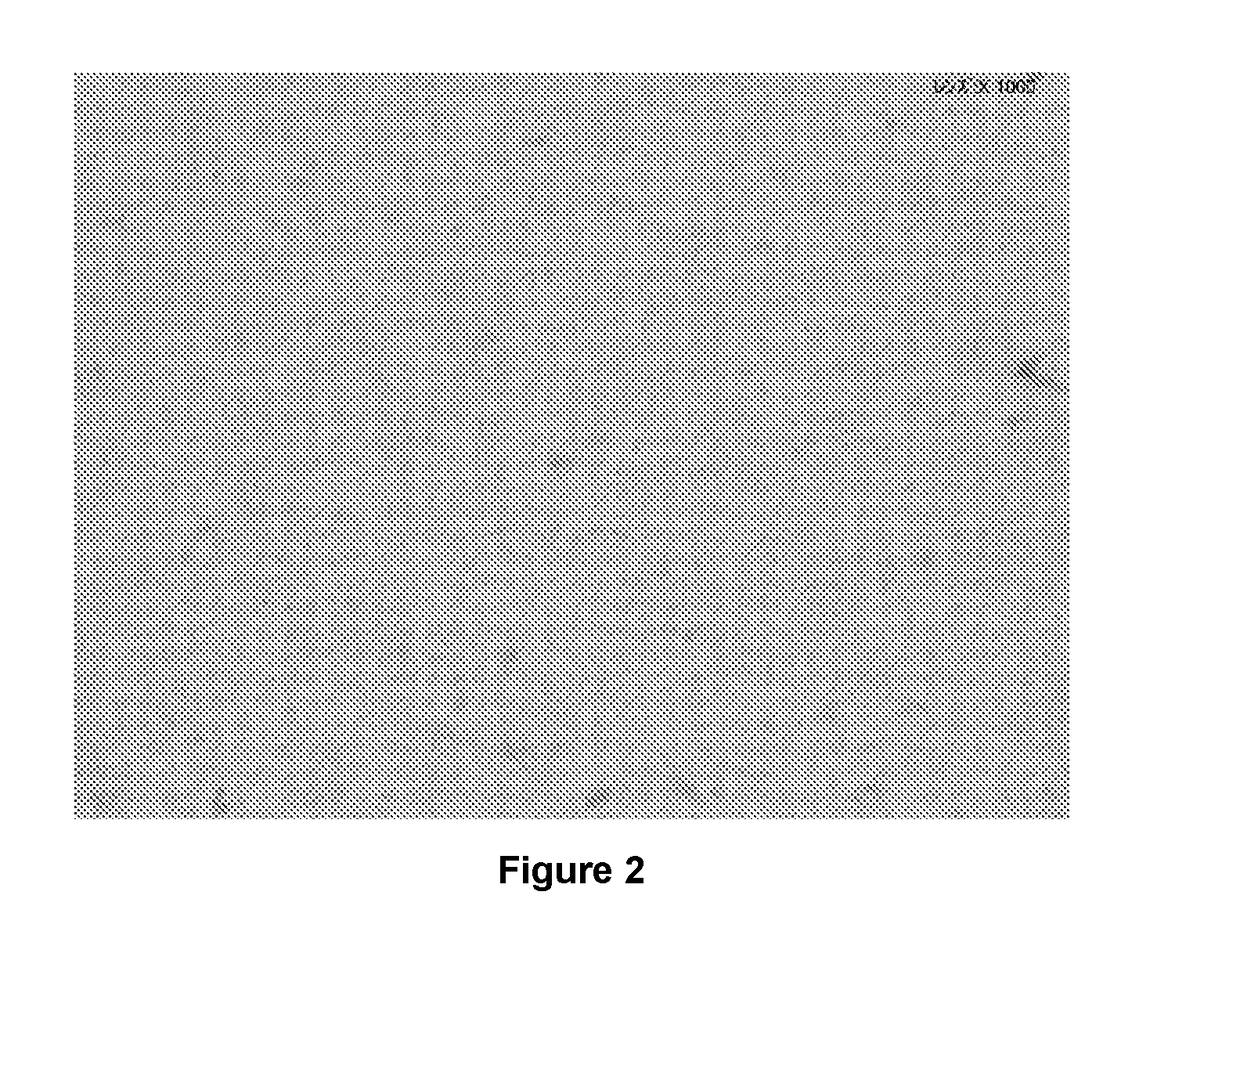 Thermo-Shielding Window Coating Composition and Method